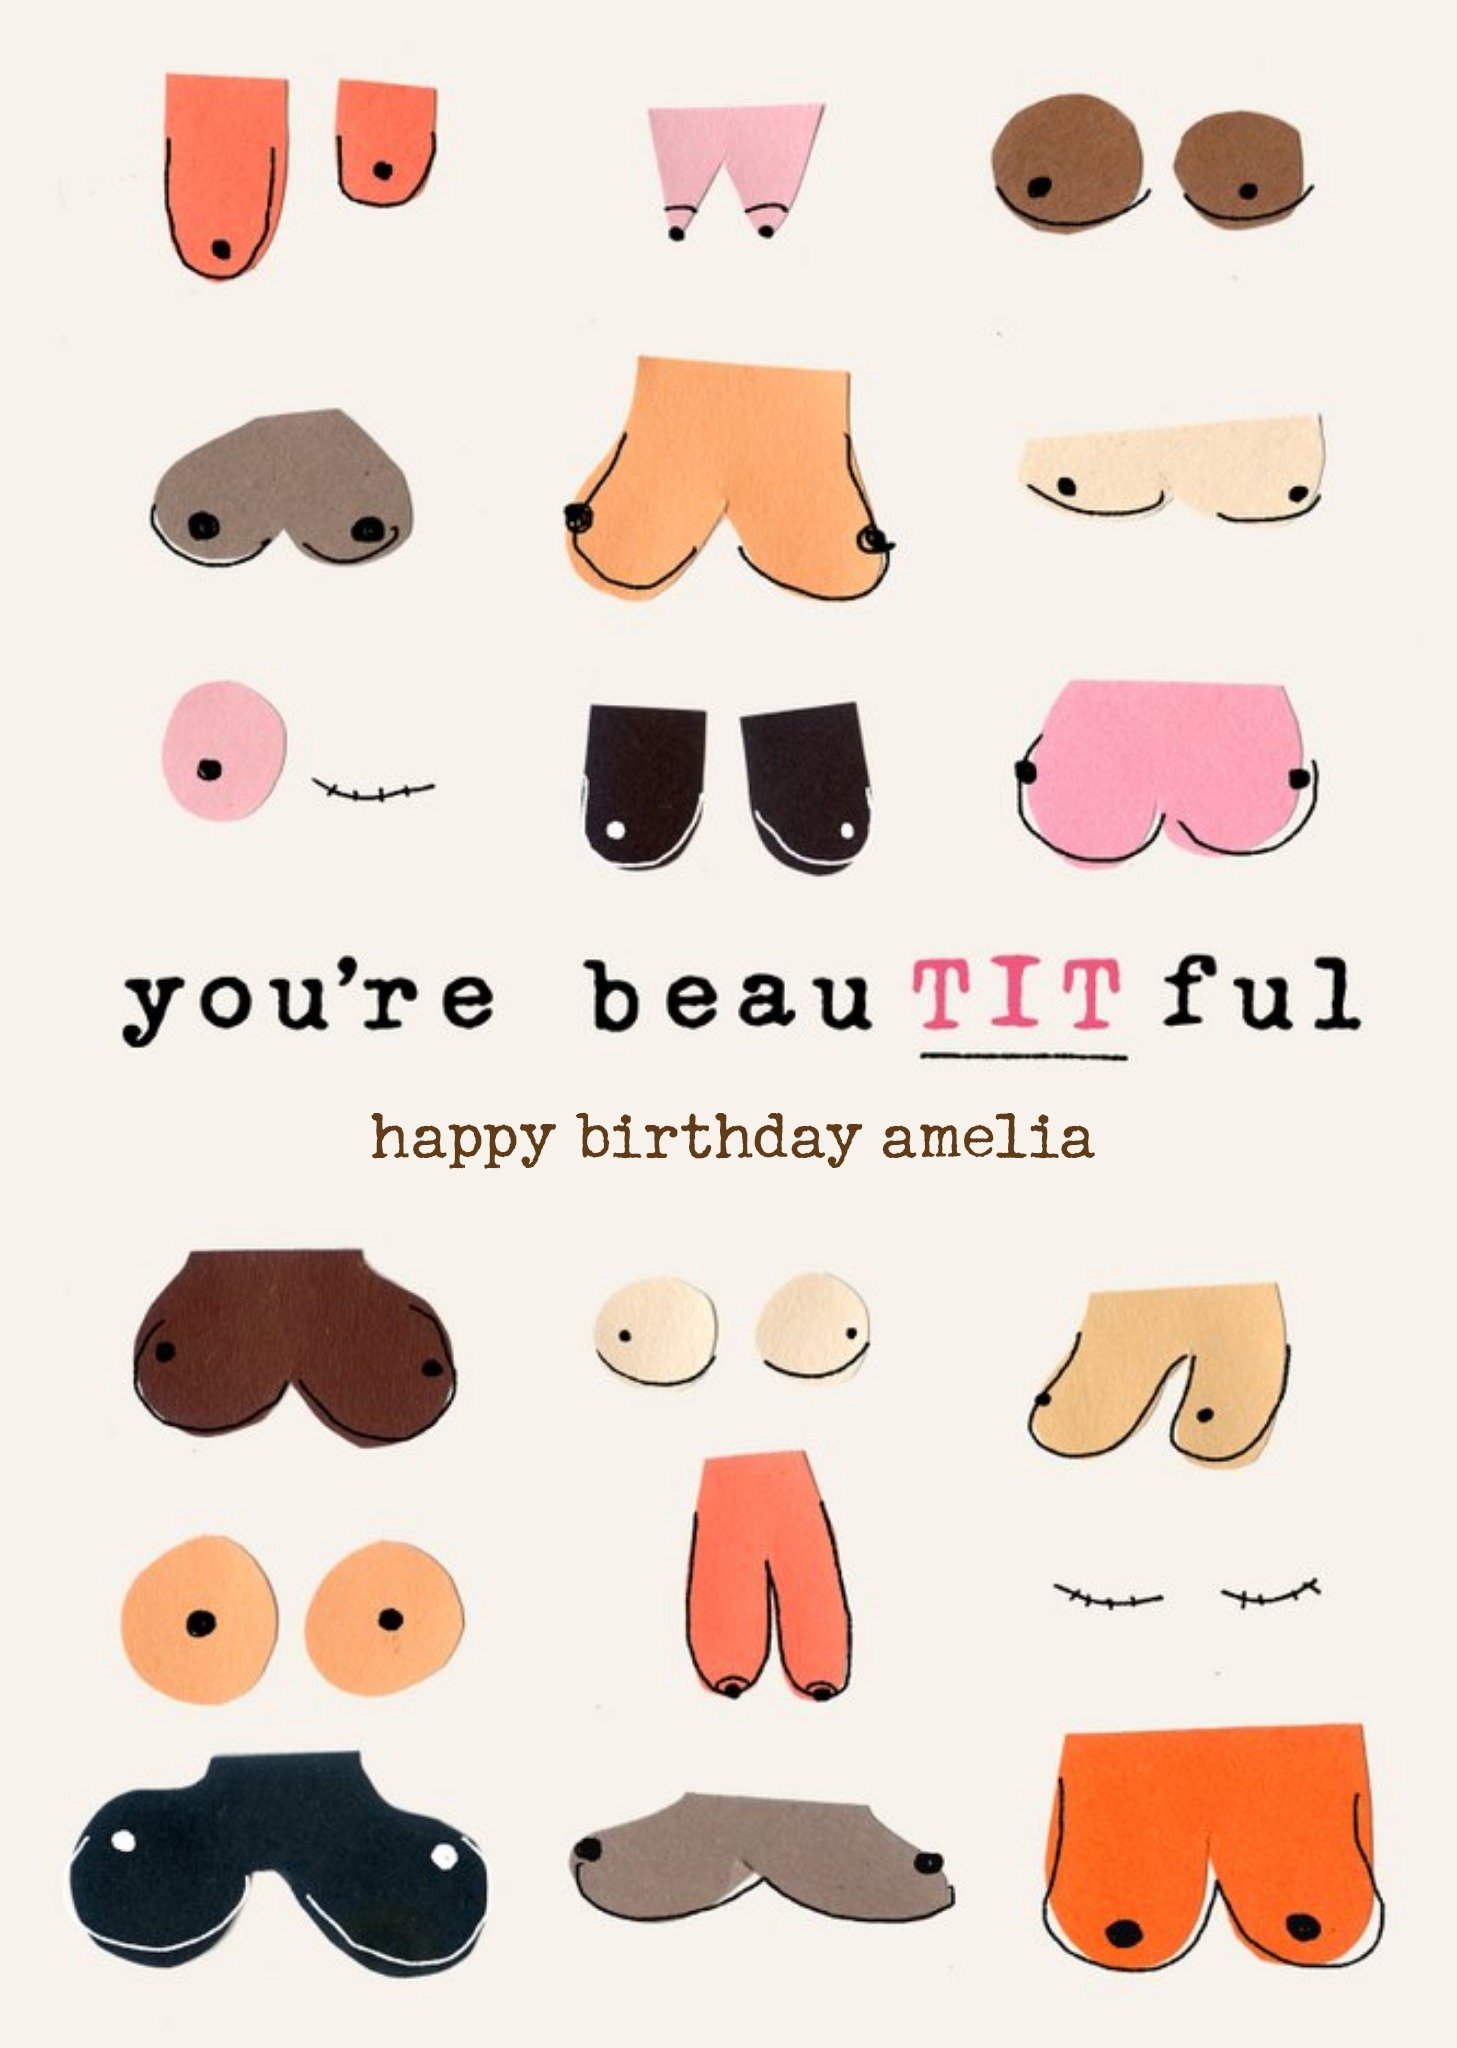 Moonpig Illustrated Boobs Tits You're Beautitful Happy Birthday Card, Large